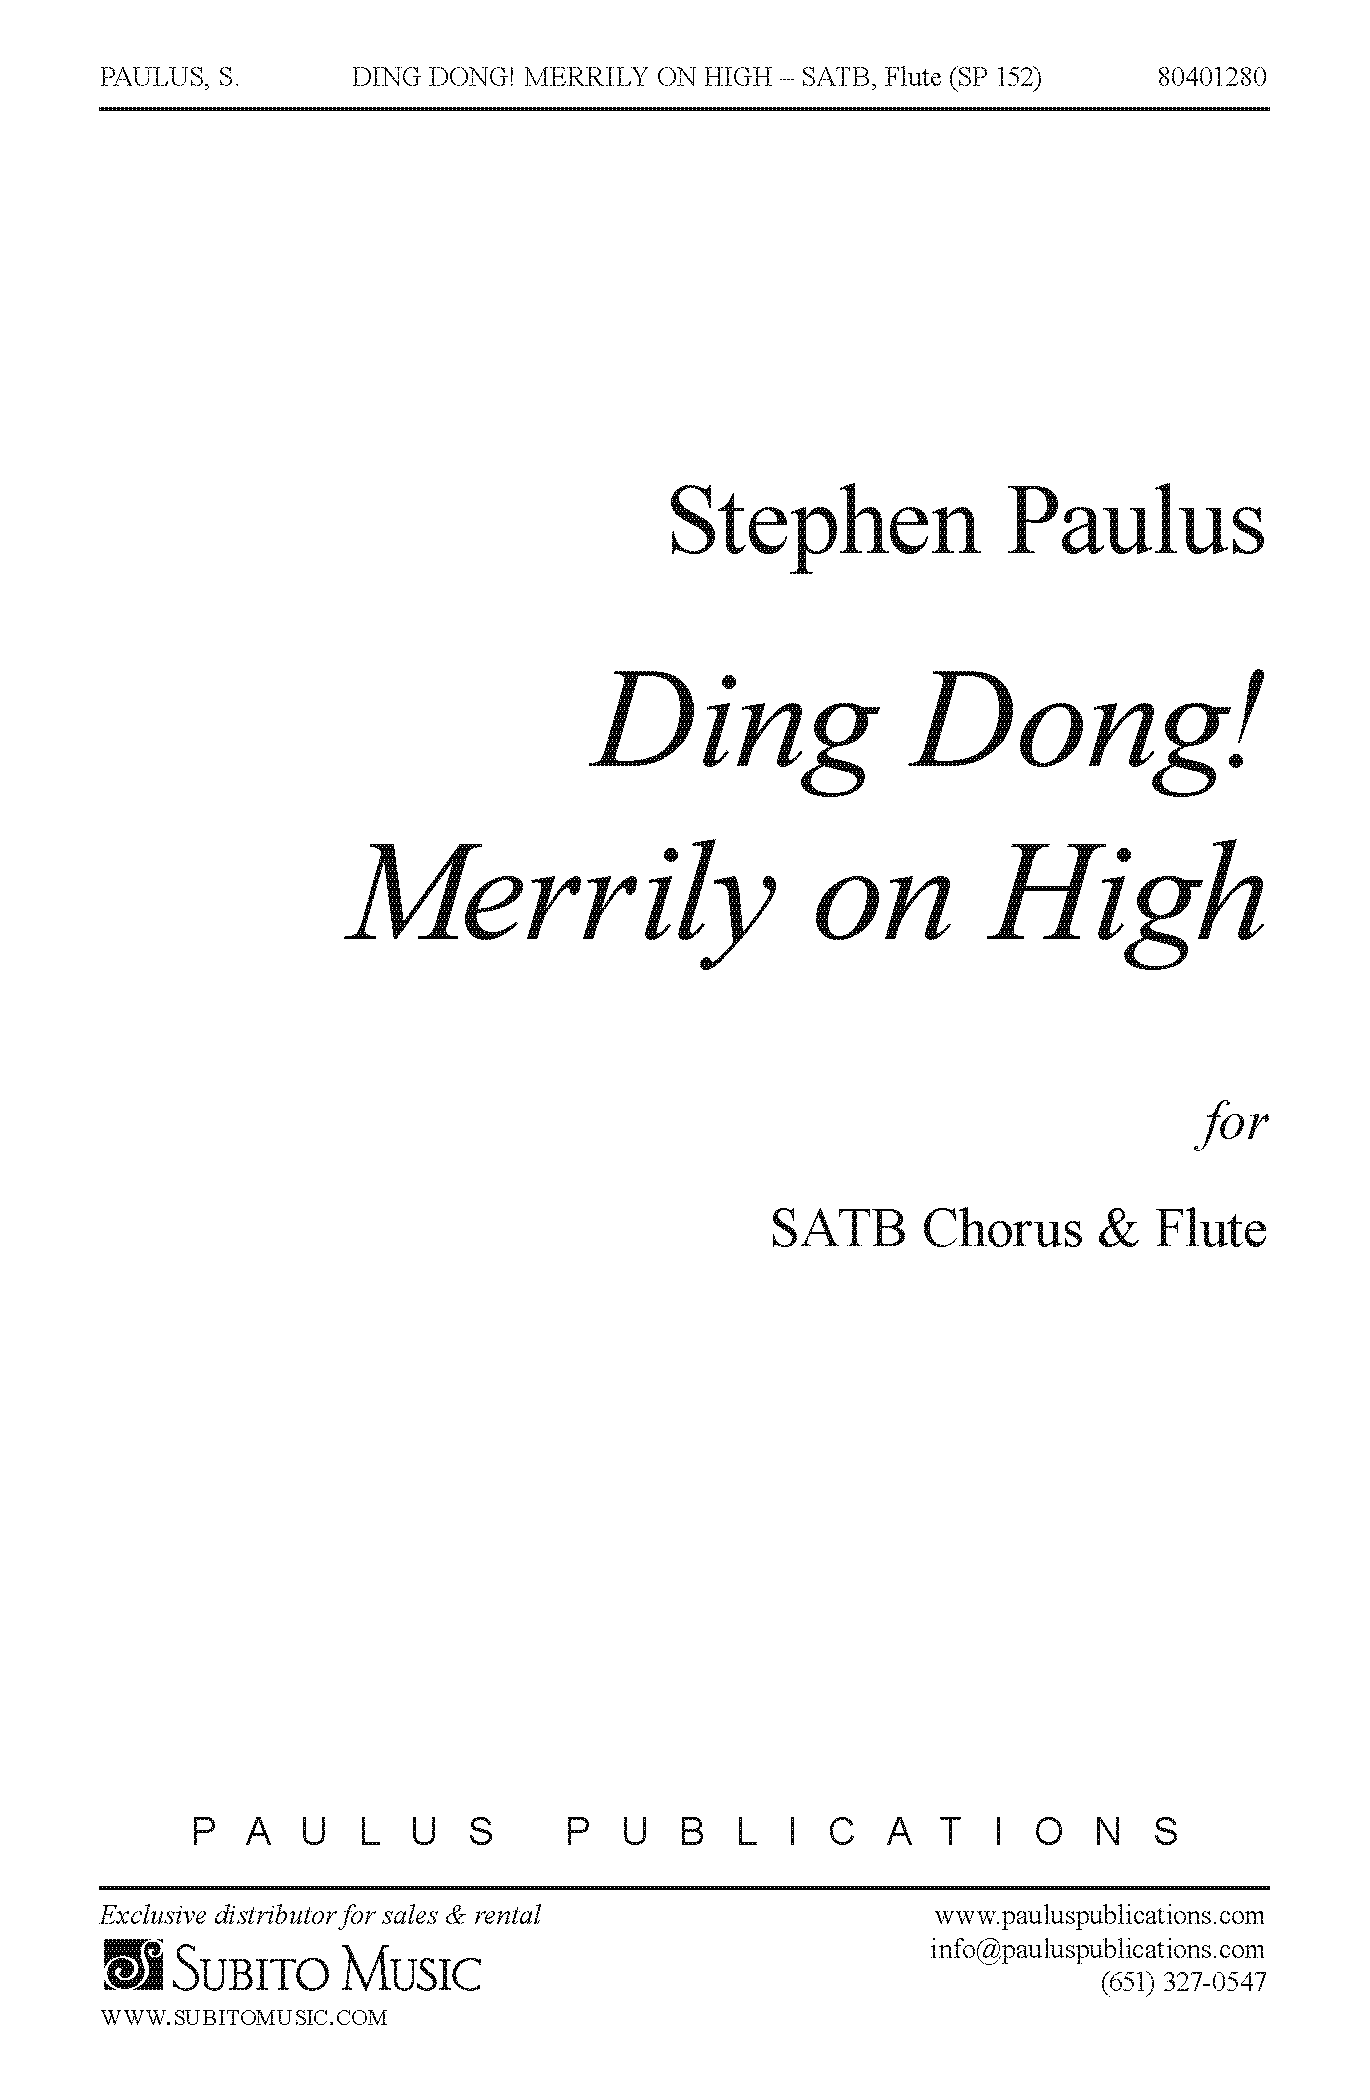 Ding, Dong! Merrily on High for SATB Chorus & Flute